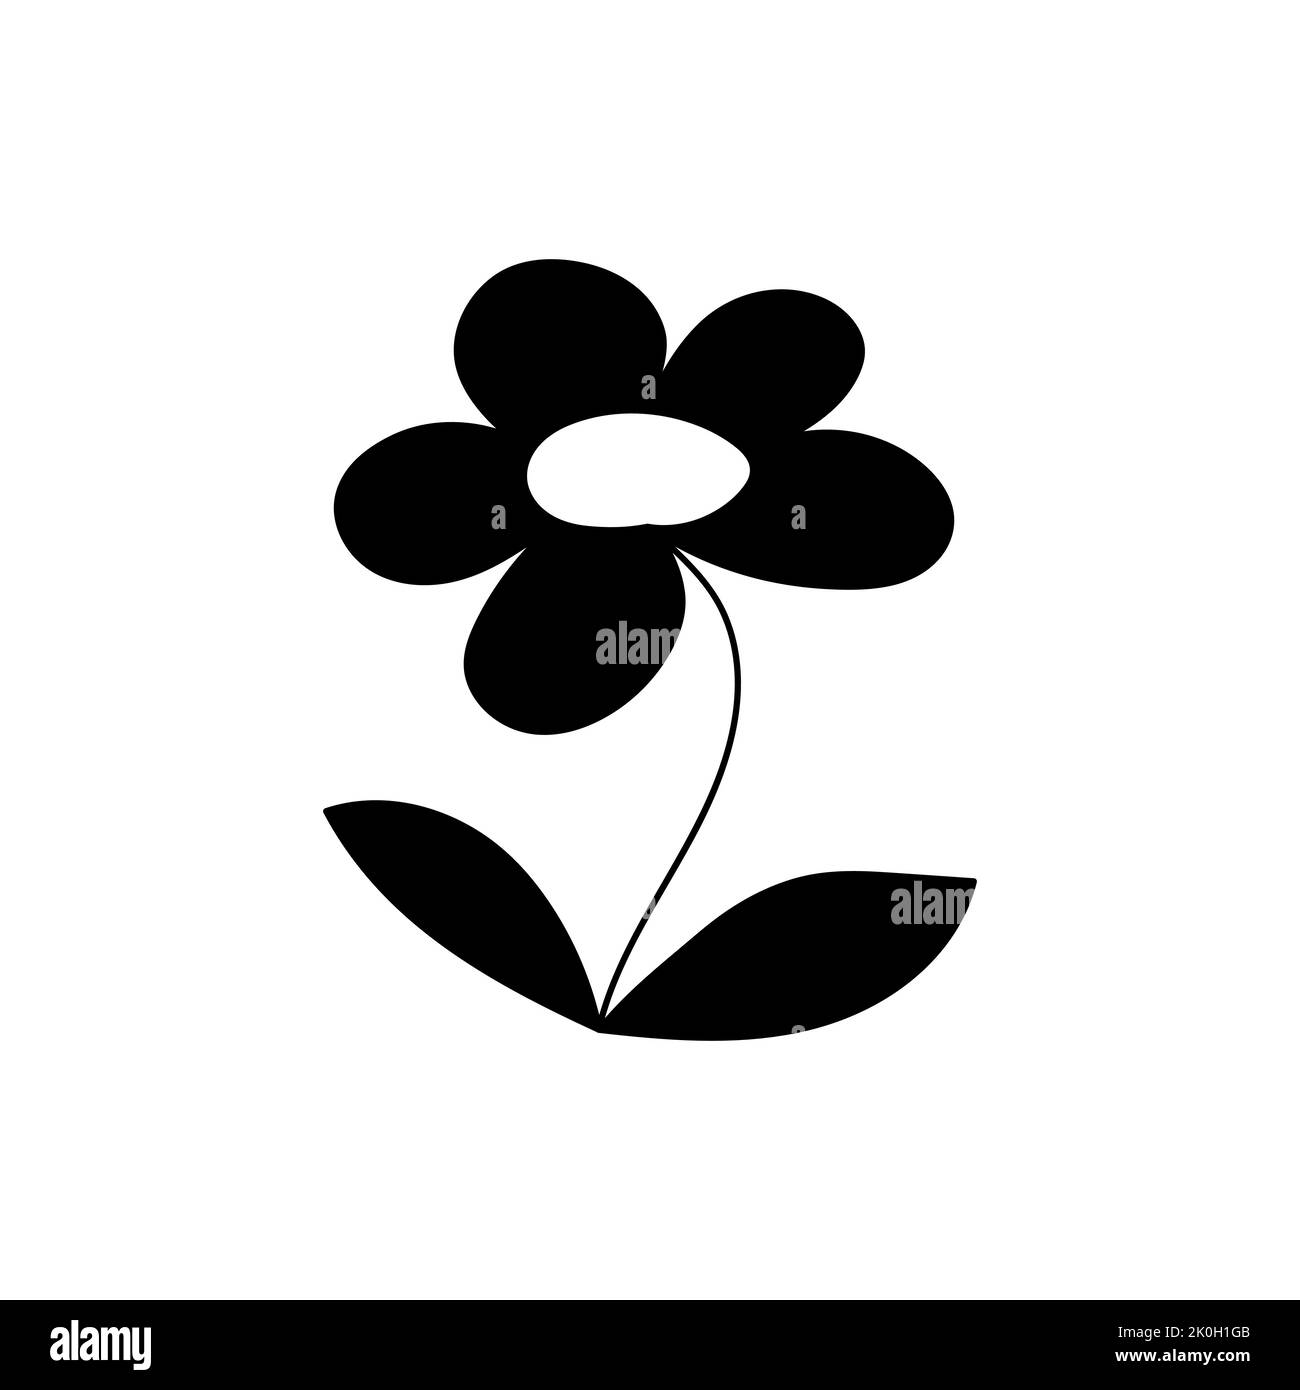 Silhouette image of chamomile. Vector illustration of a flower. Flowers and plants Stock Vector